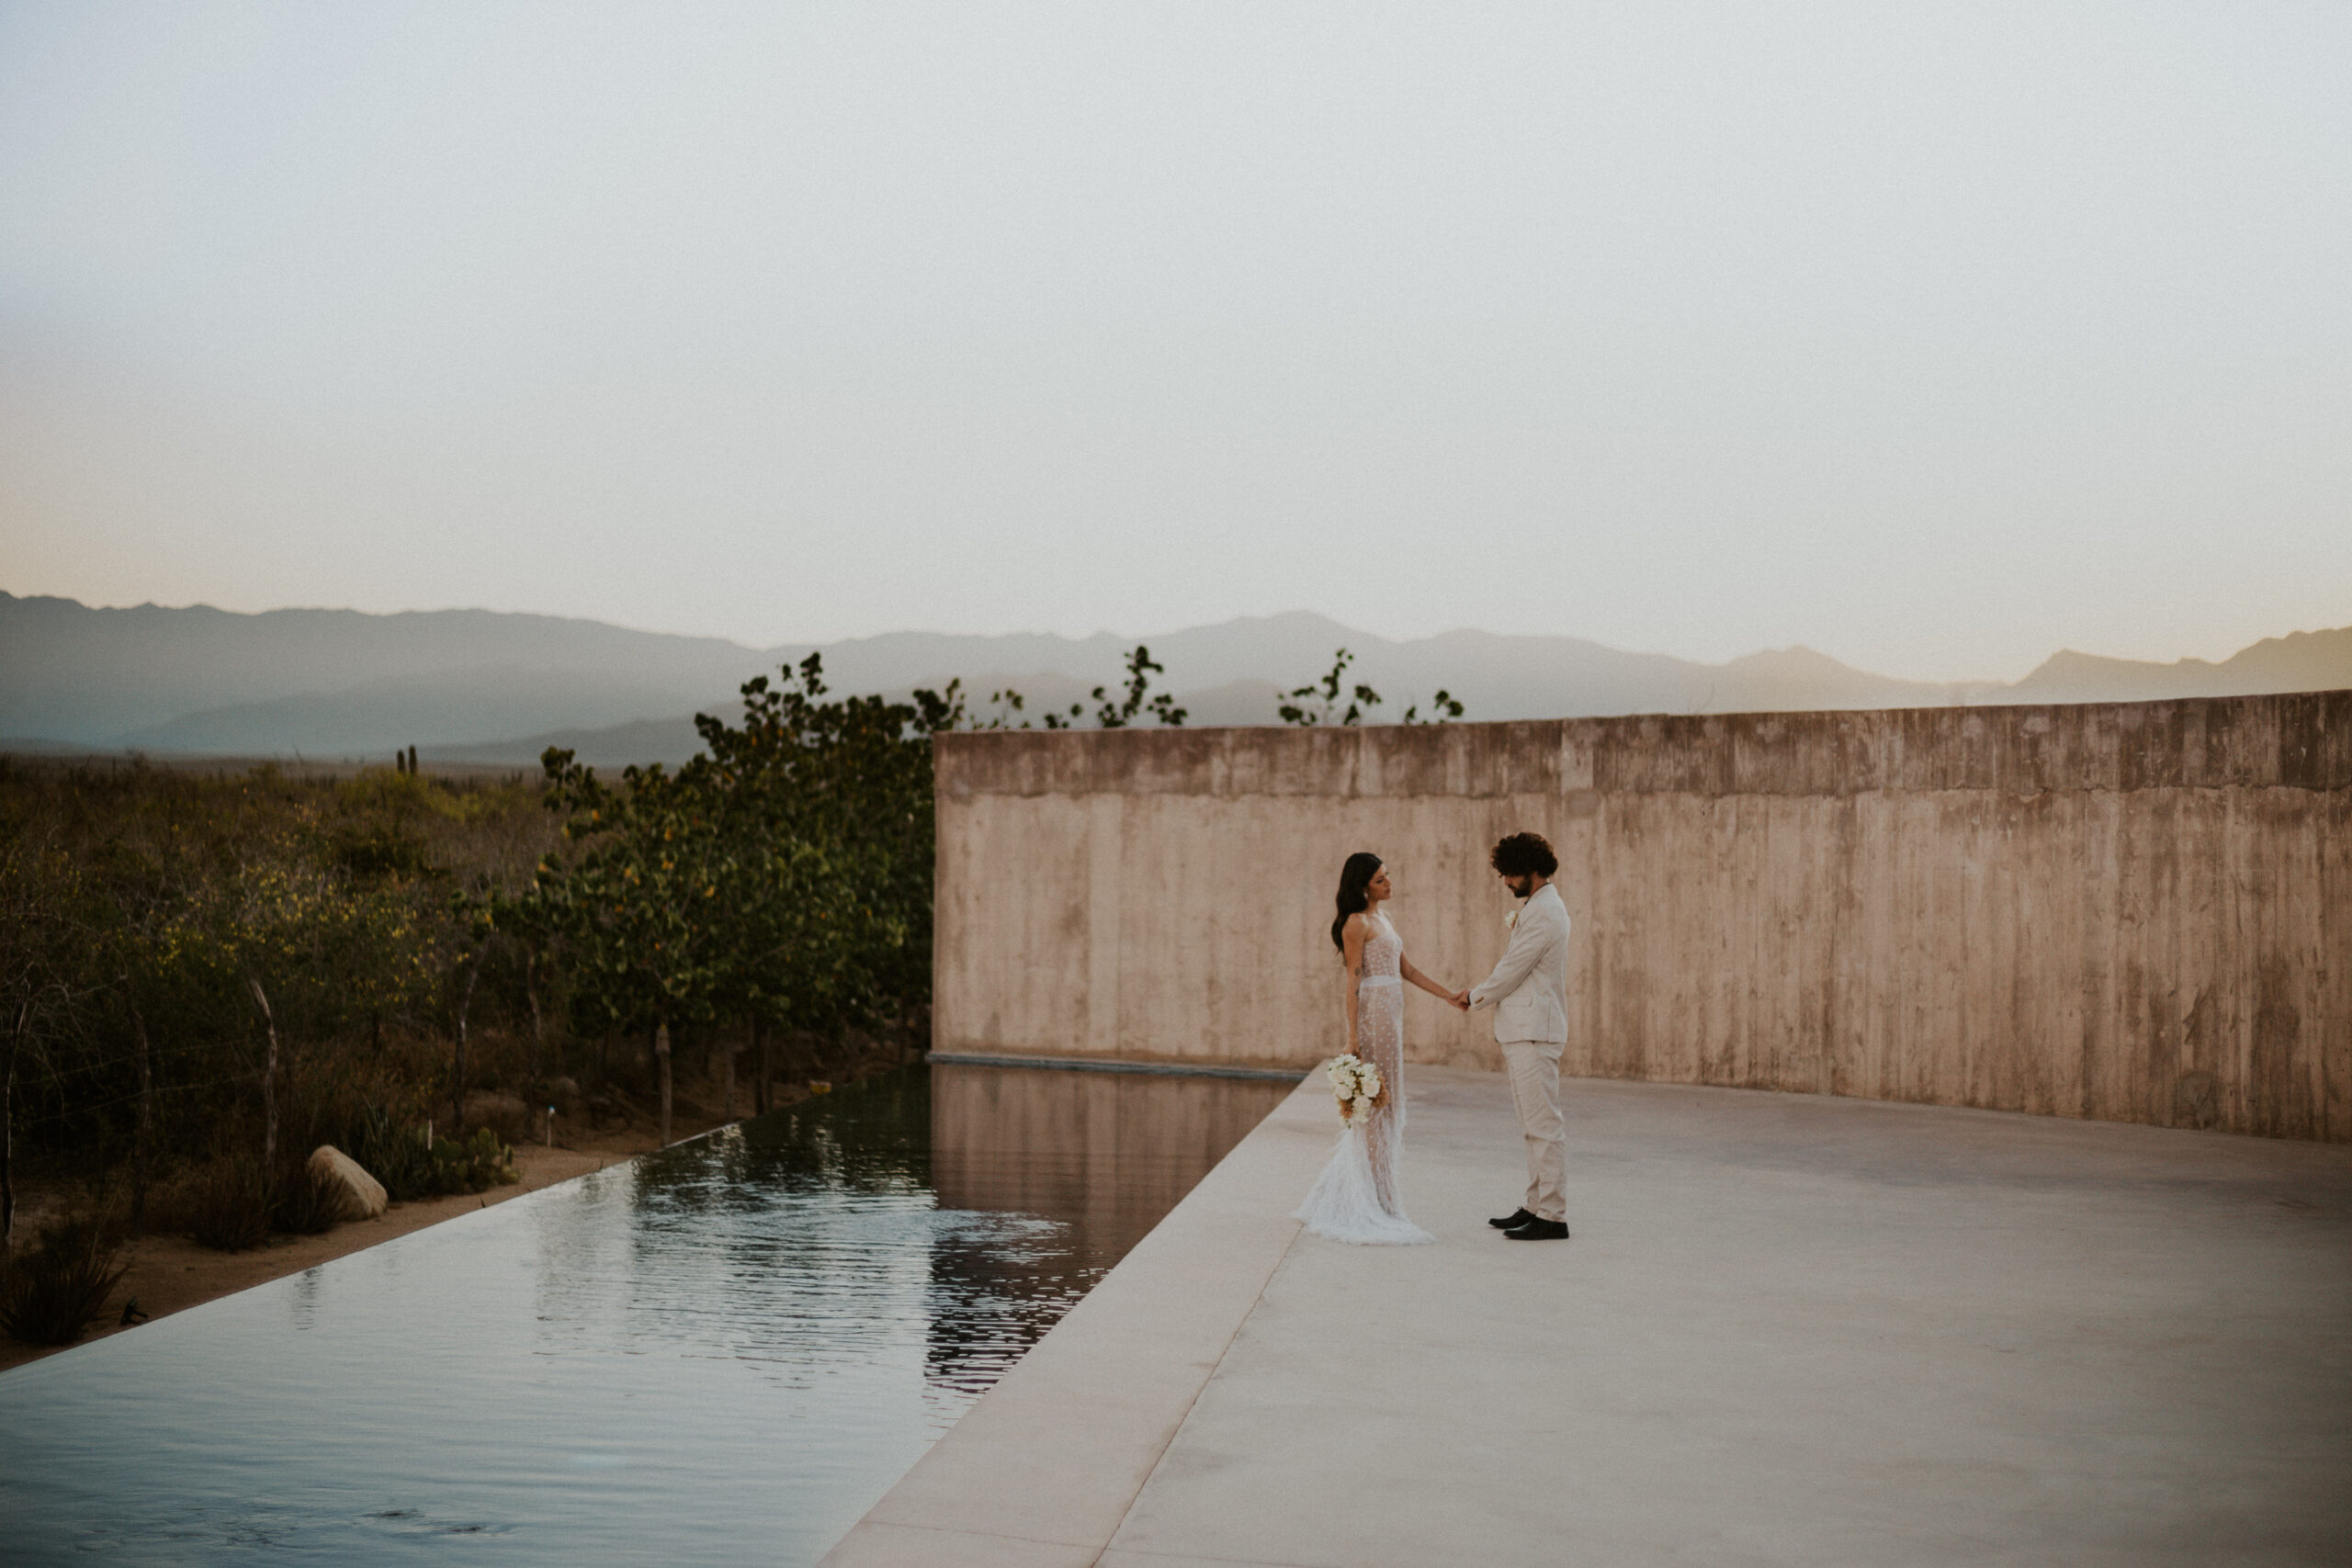 Couple eloping at sunrise by the pool, overlooking the desert at Paradero in Todos Santos, Mexico.